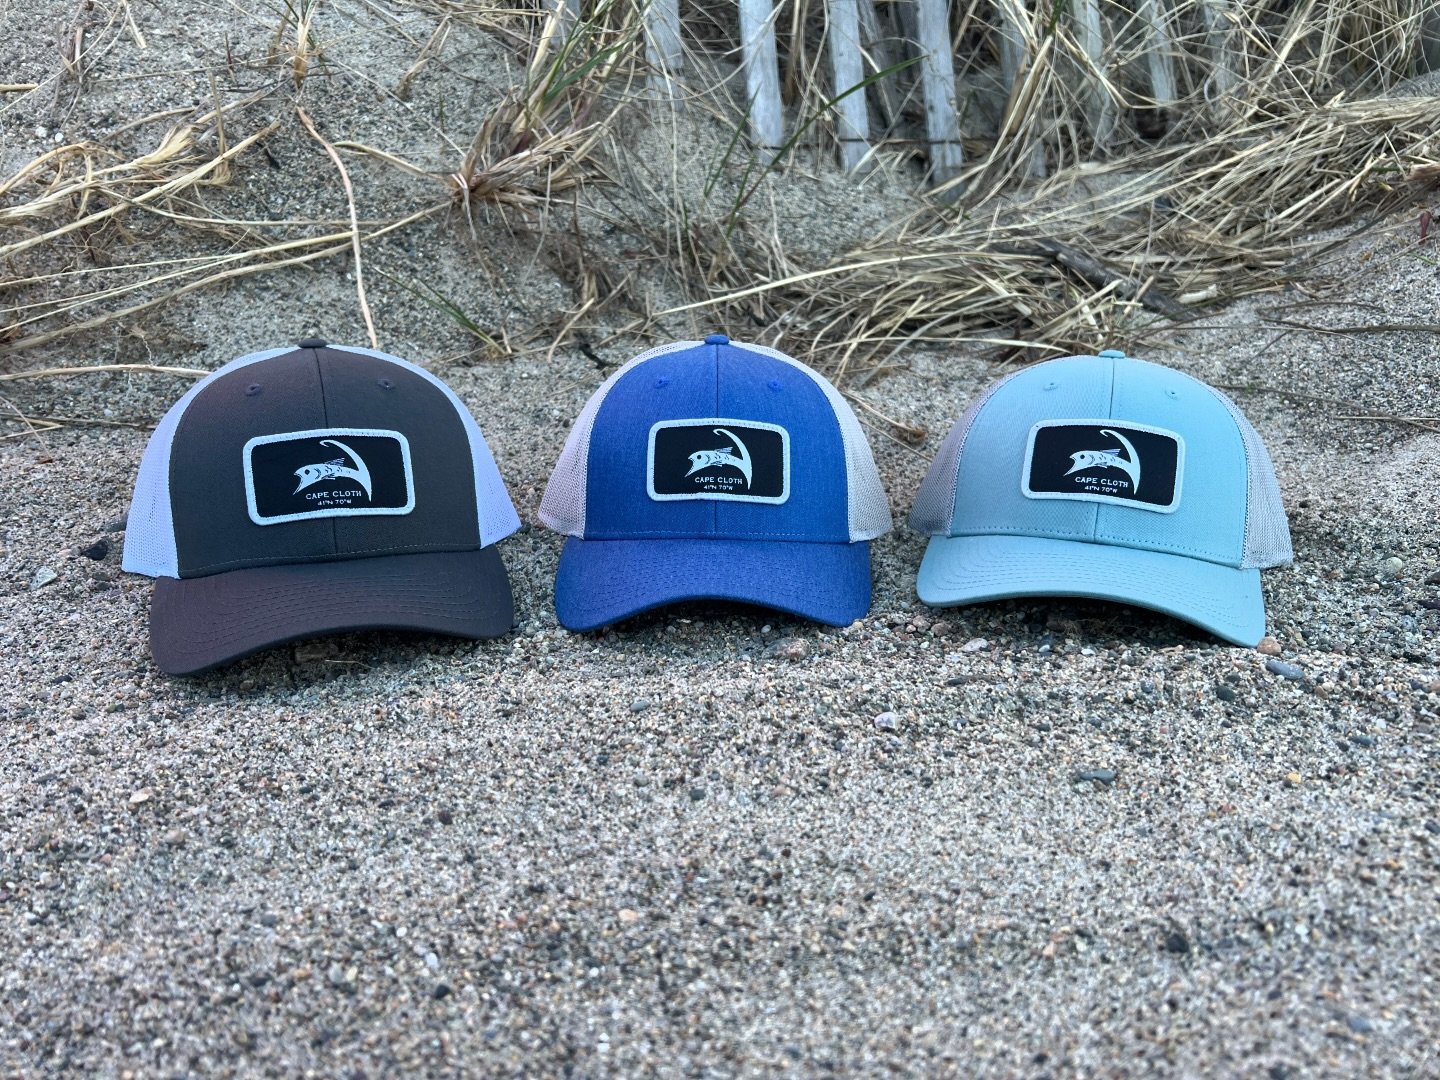 🚨NEW IN THE SHOP!!!🚨 We love this new Foreshore Trucker patch design so much we made three different colors! They have a low profile that delivers a more tailored shape and adjustable snapback for an ideal fit for all sizes! Available now online‼️
